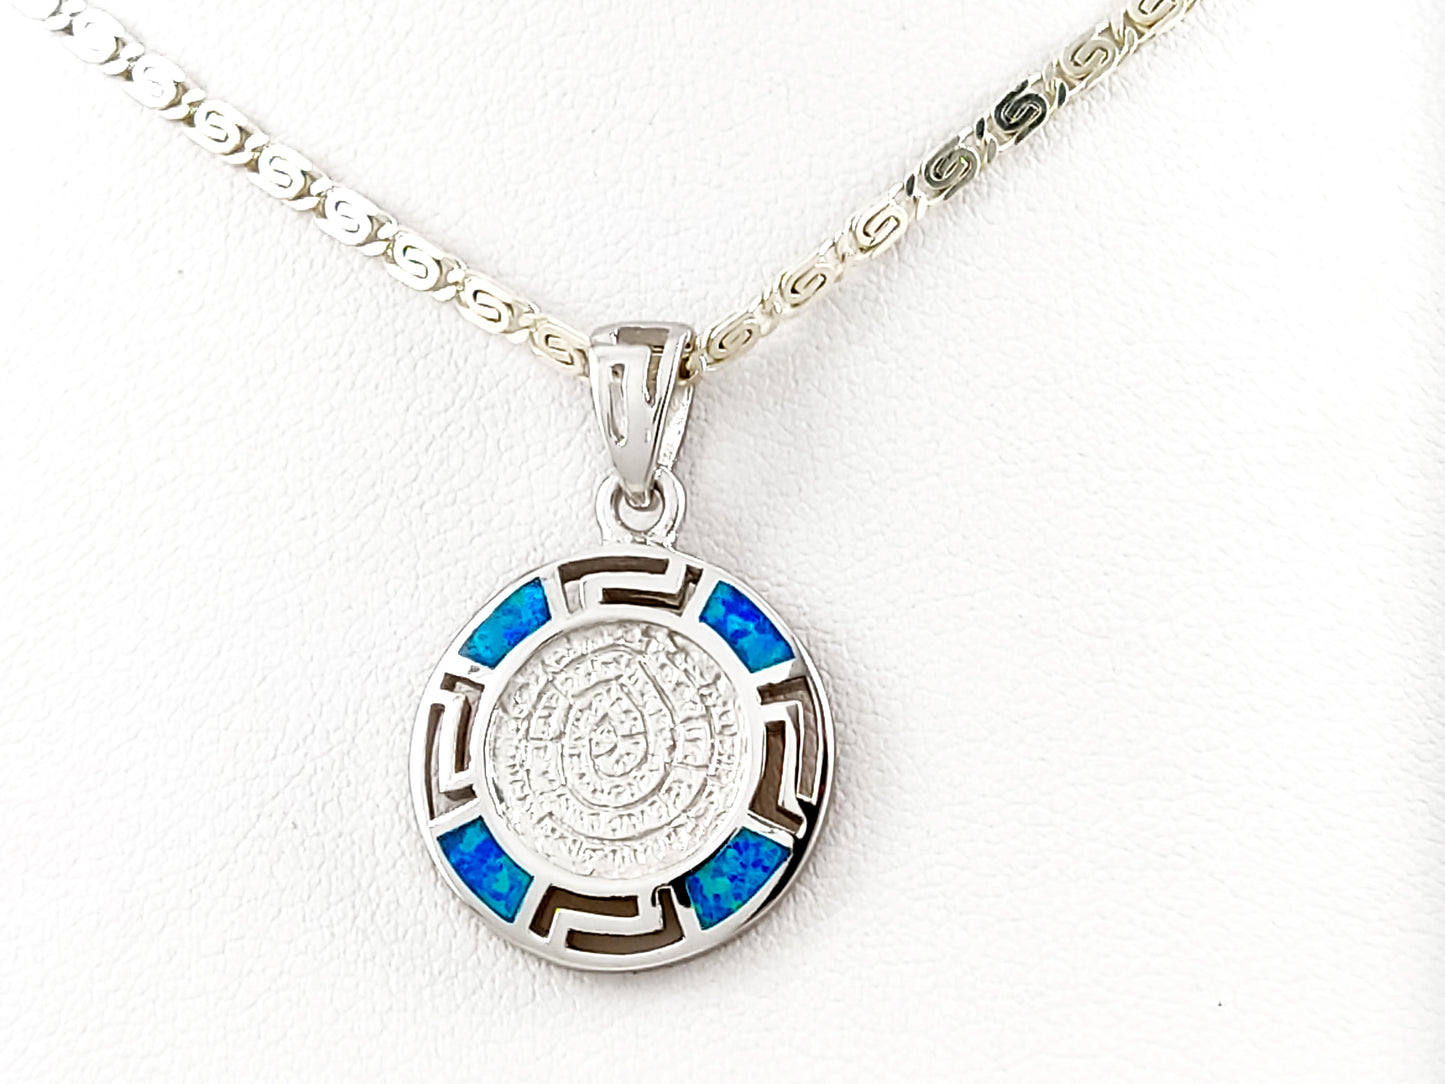 Phaistos disc blue opal silver necklace from Greece. The pendant meeasures 18mm and the chain is 2mm in width and available in all sizes.